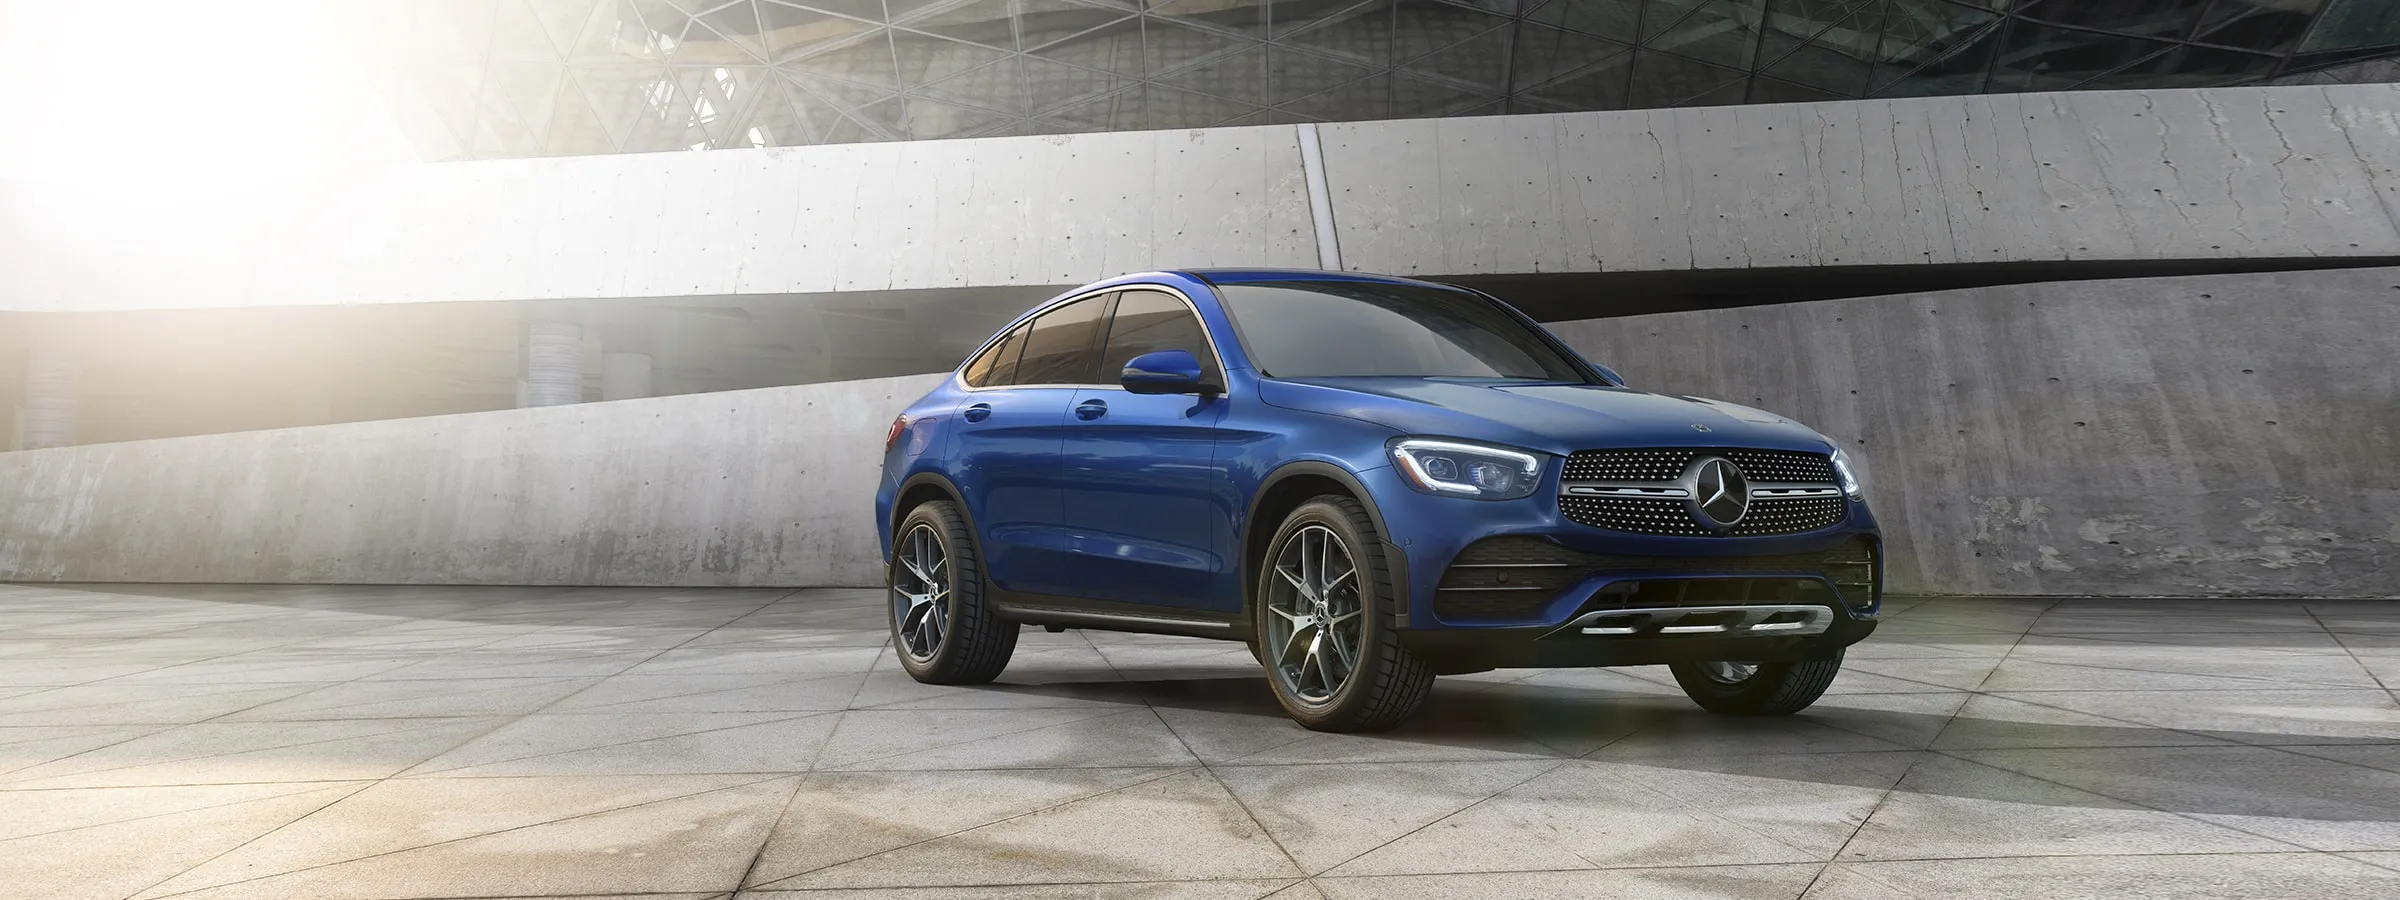 https://www.mbusa.com/content/dam/mb-nafta/us/myco/my23/glc/coupe/class-page/series/2023-GLC-COUPE-HERO-DR.jpg